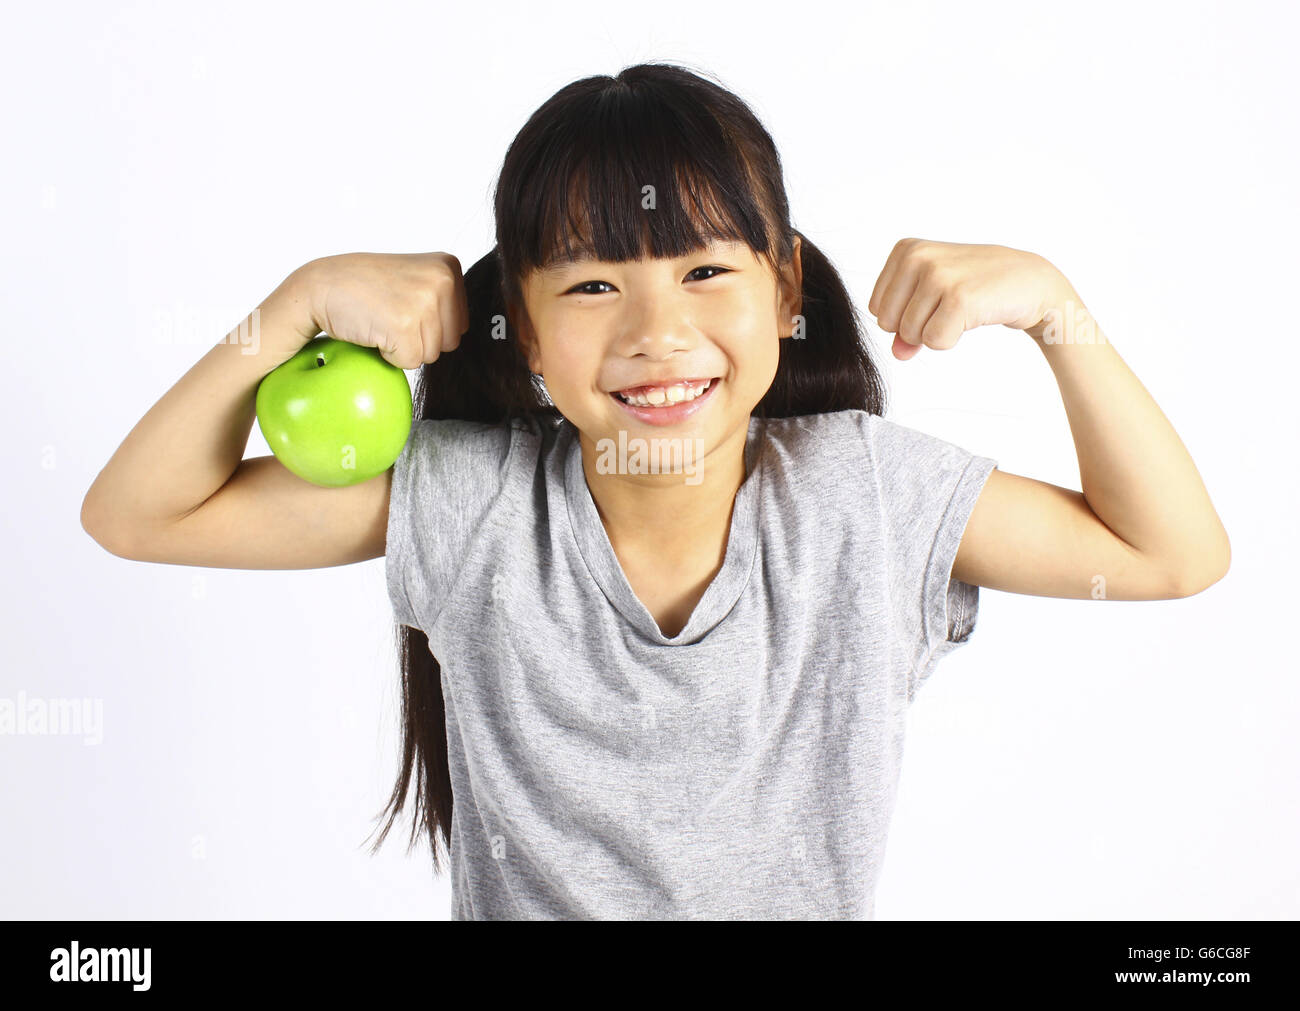 A little girl flexes her muscle while showing off the apple Stock Photo